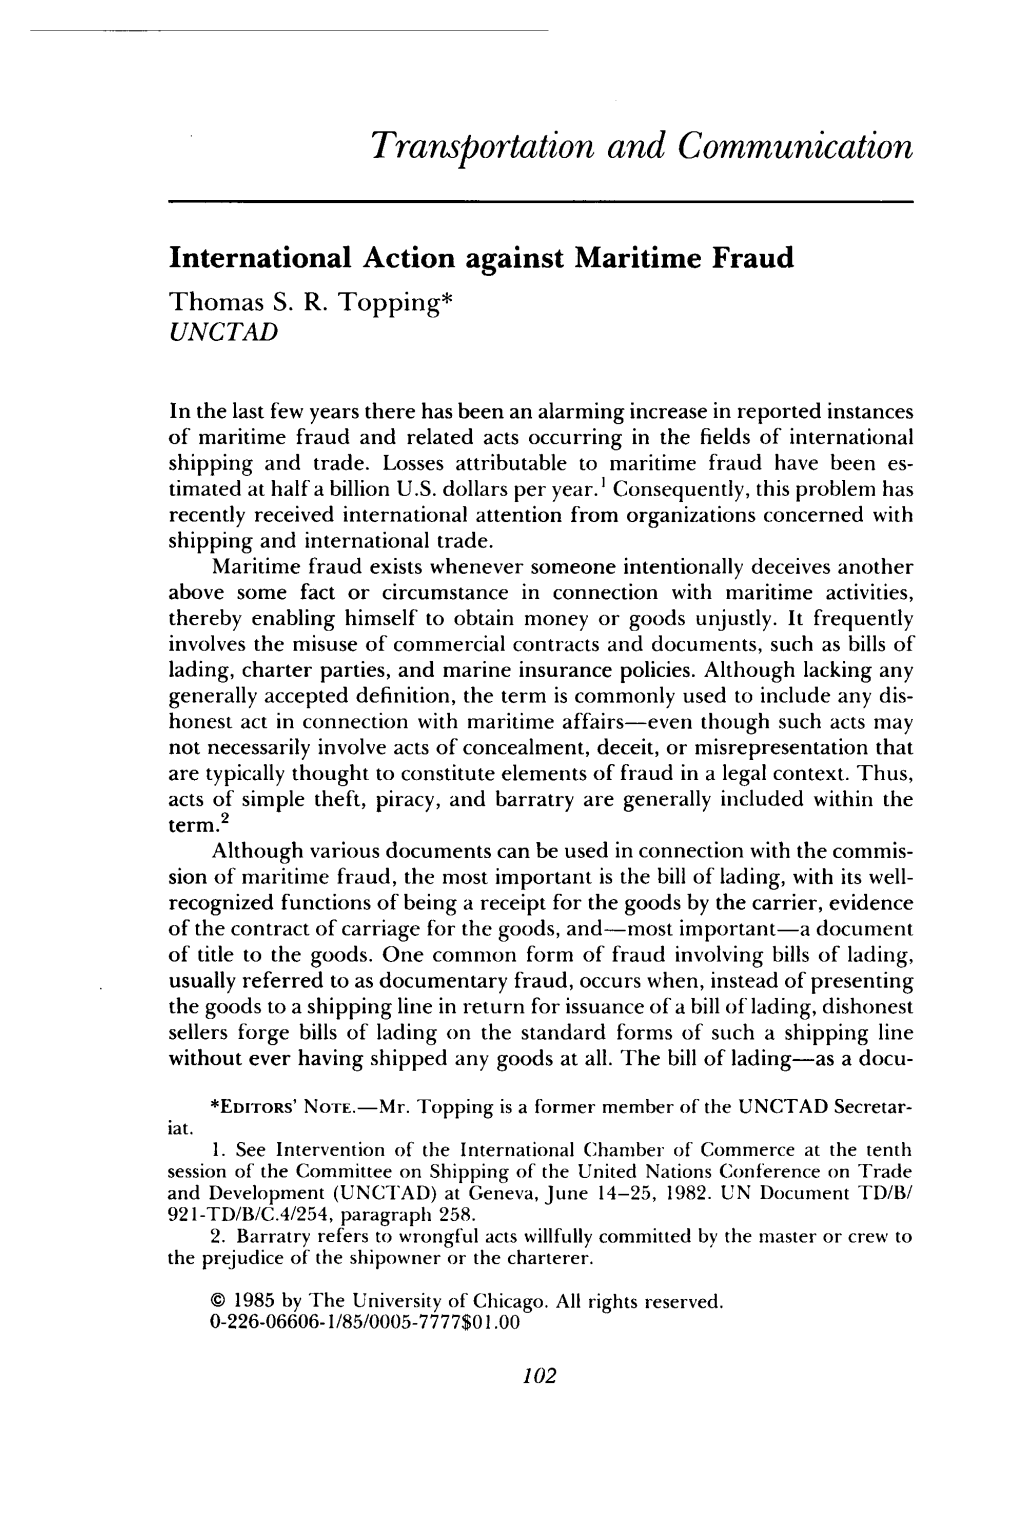 International Action Against Maritime Fraud Thomas S. R. Topping* UNCTAD